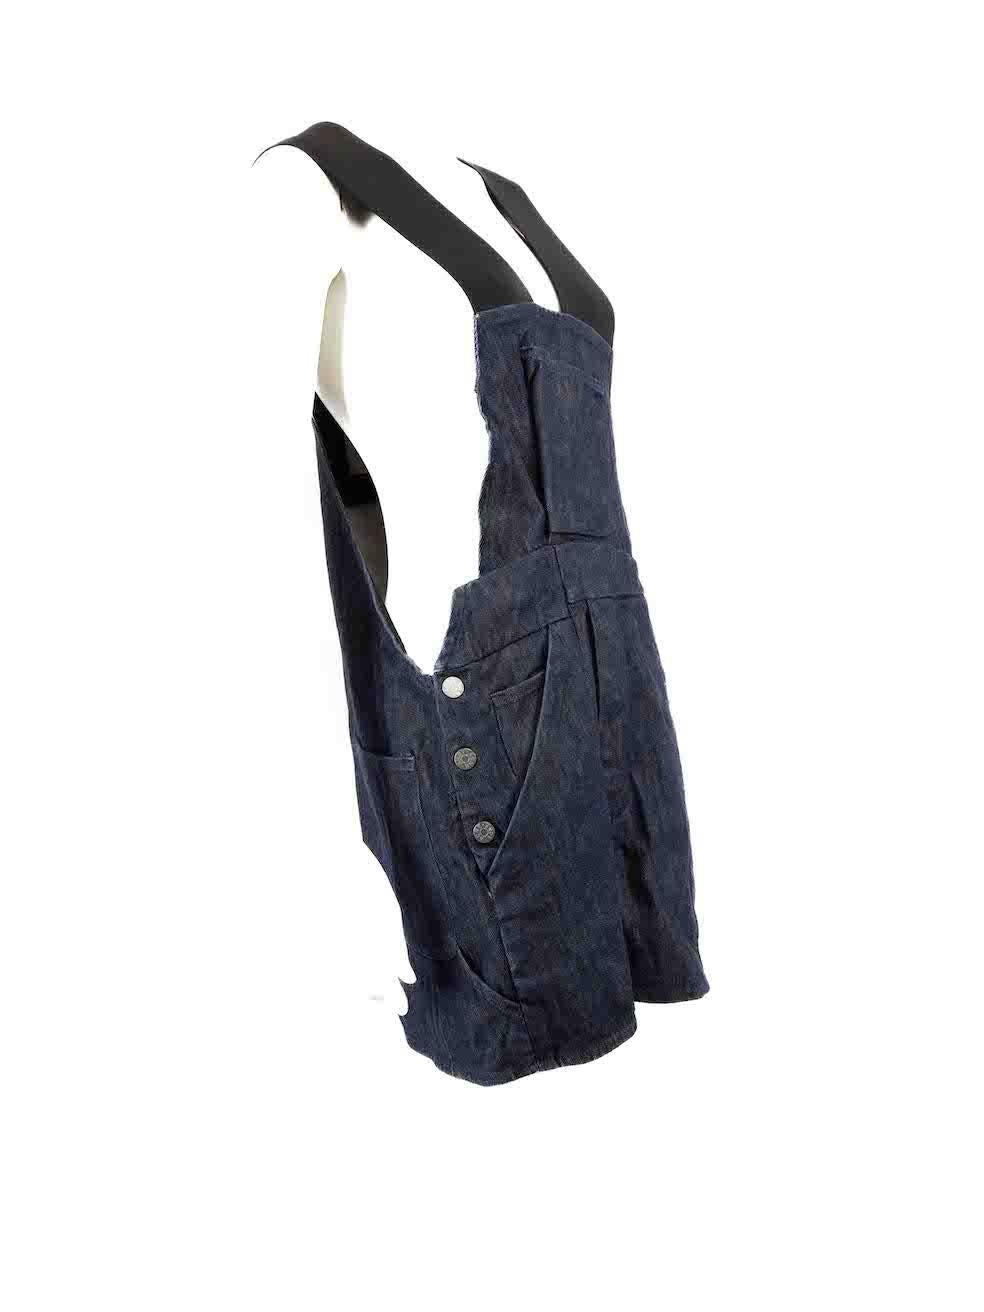 CONDITION is Very good. Minimal wear to dress is evident. Minimal wear to left side (as worn) pocket opening and front hem with two small marks to the denim on this used Acne Studios designer resale item.
 
 
 
 Details
 
 
 Blue
 
 Denim
 
